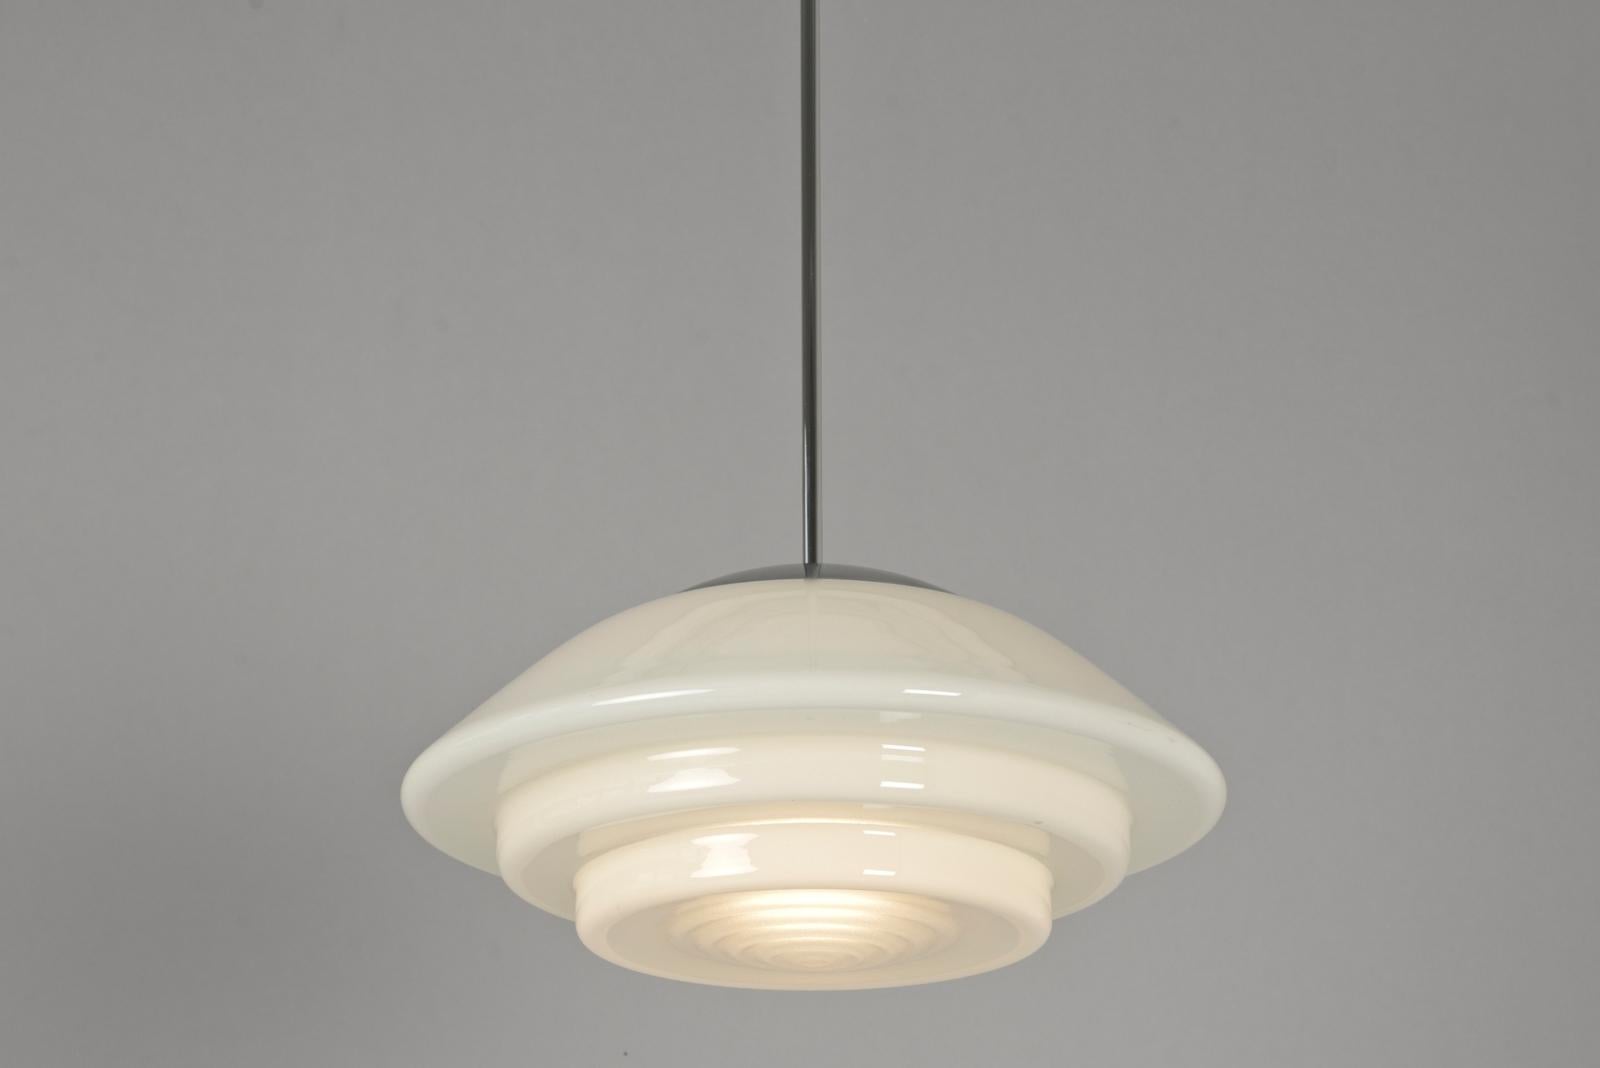 Pair of Pendant Lamps in Milk Glass, Germany - 1935 In Good Condition For Sale In Berlin, DE